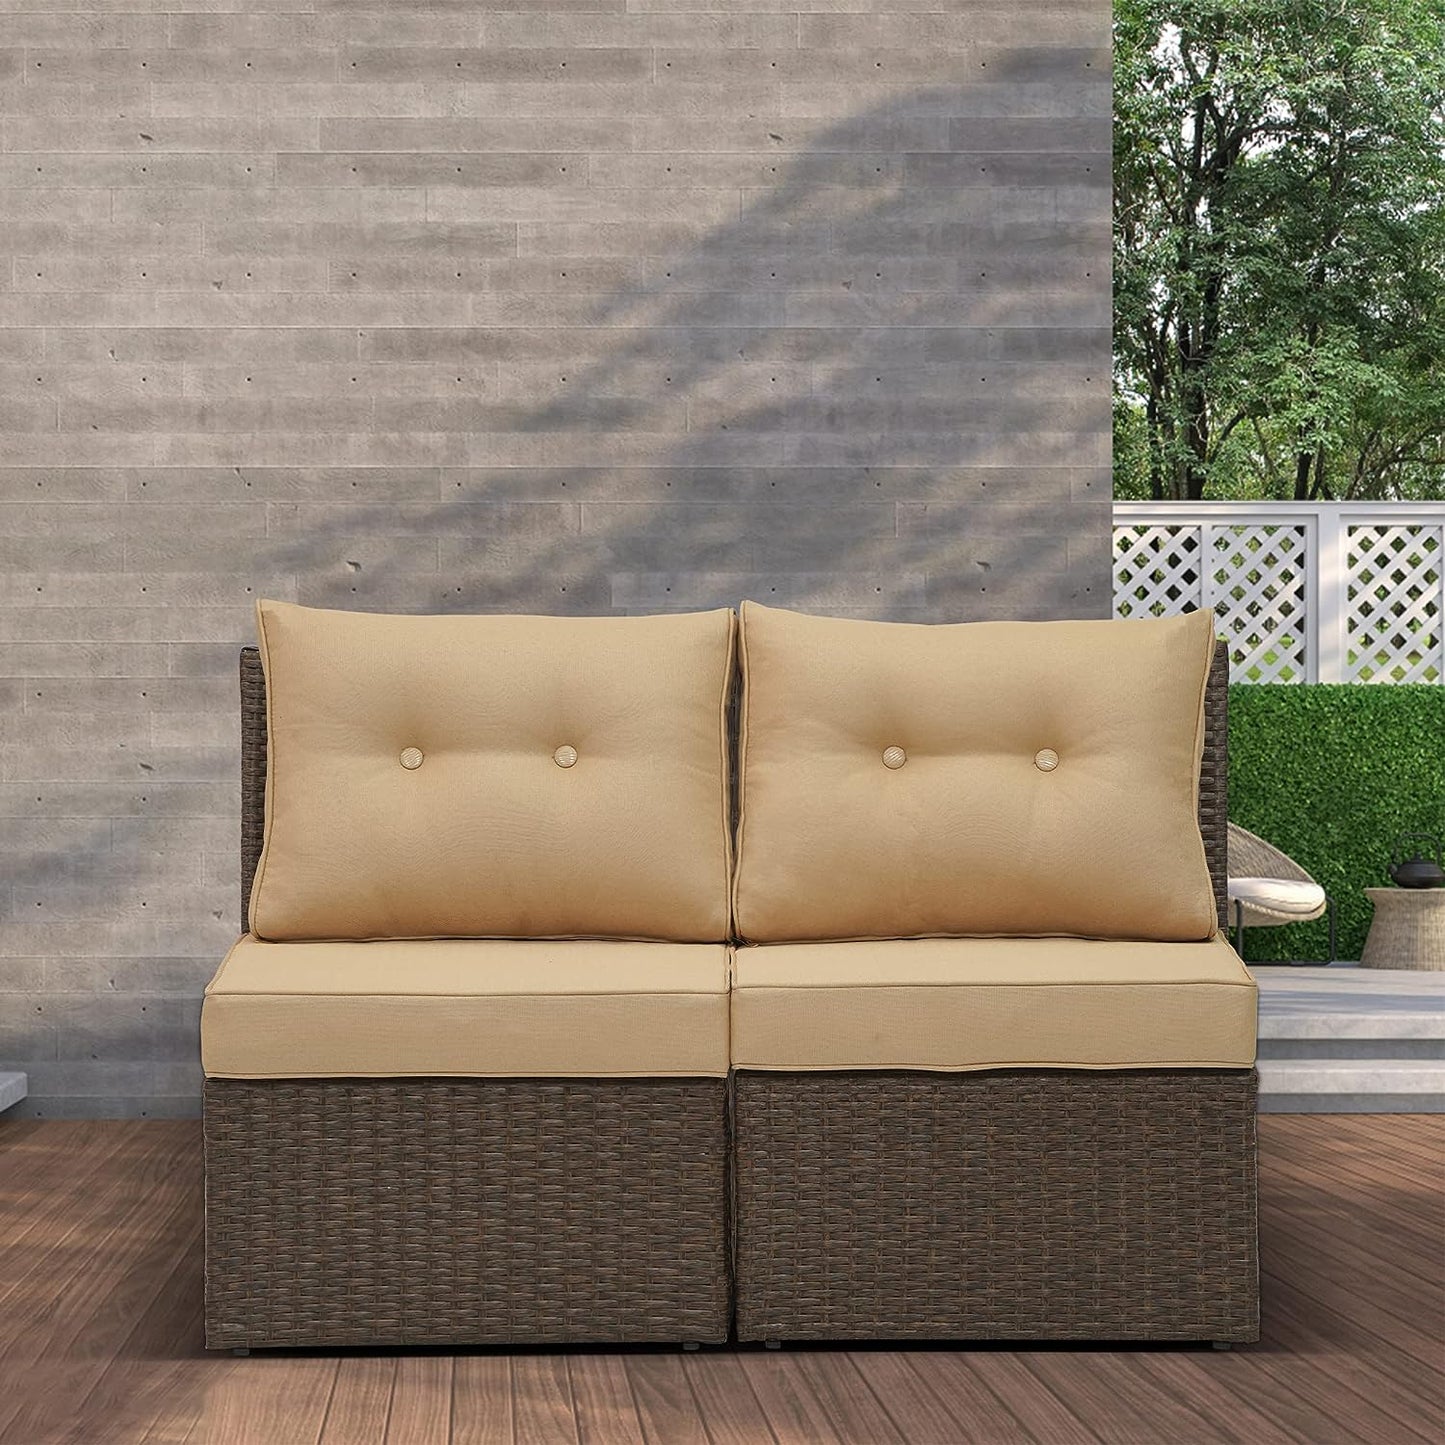 SUNVIVI OUTDOOR Brown Wicker Patio Sofa Chair Armless with Beige Cushions, Aluminum Frame Small Outdoor Couch Chair for Garden Backyard Pool,2 Pieces